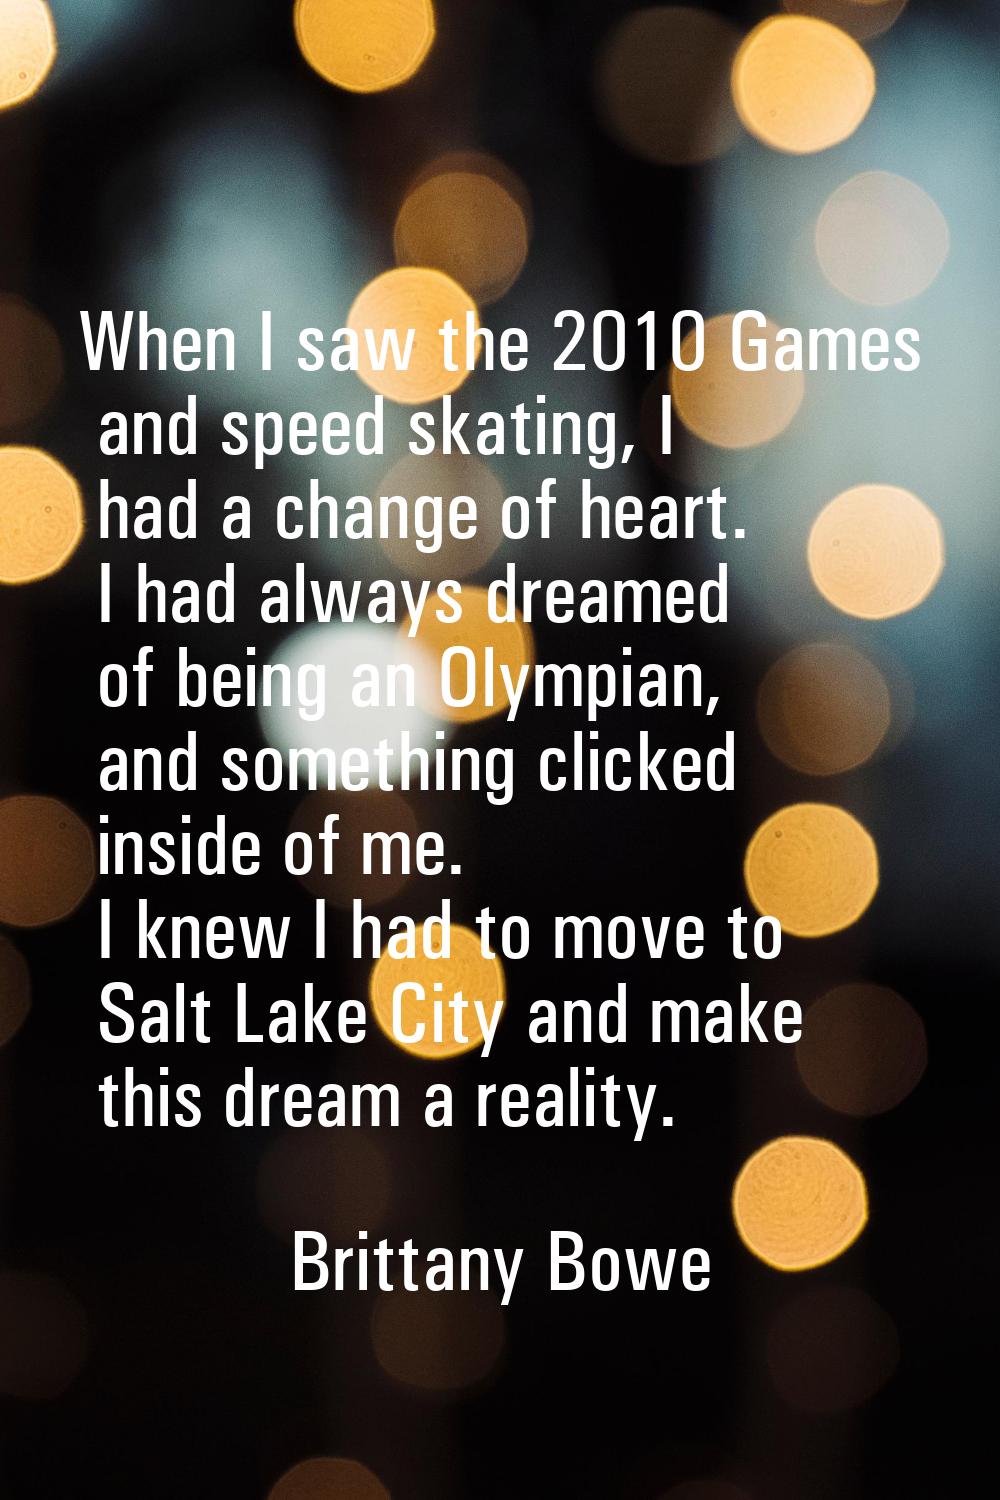 When I saw the 2010 Games and speed skating, I had a change of heart. I had always dreamed of being